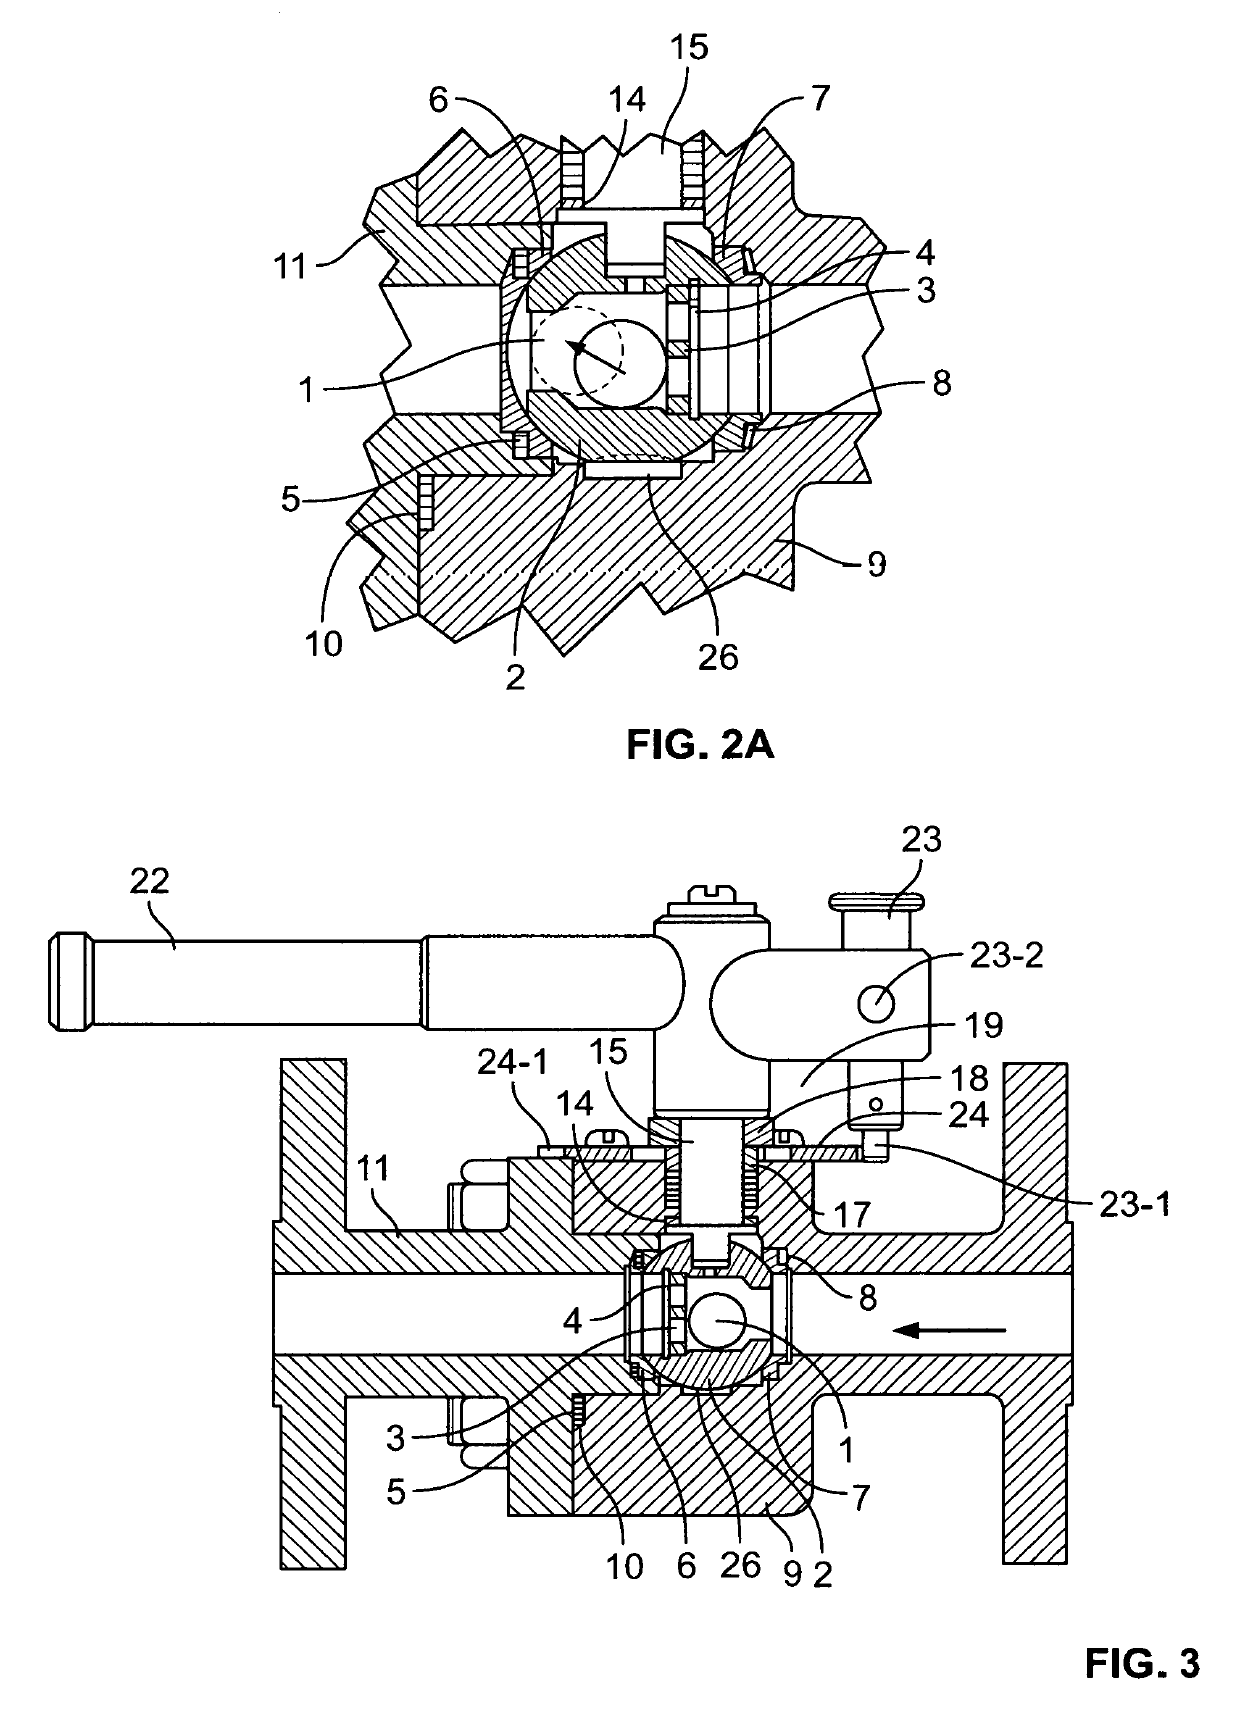 Spherical automatic flow emergency restrictor (S.A.F.E.R.) valve